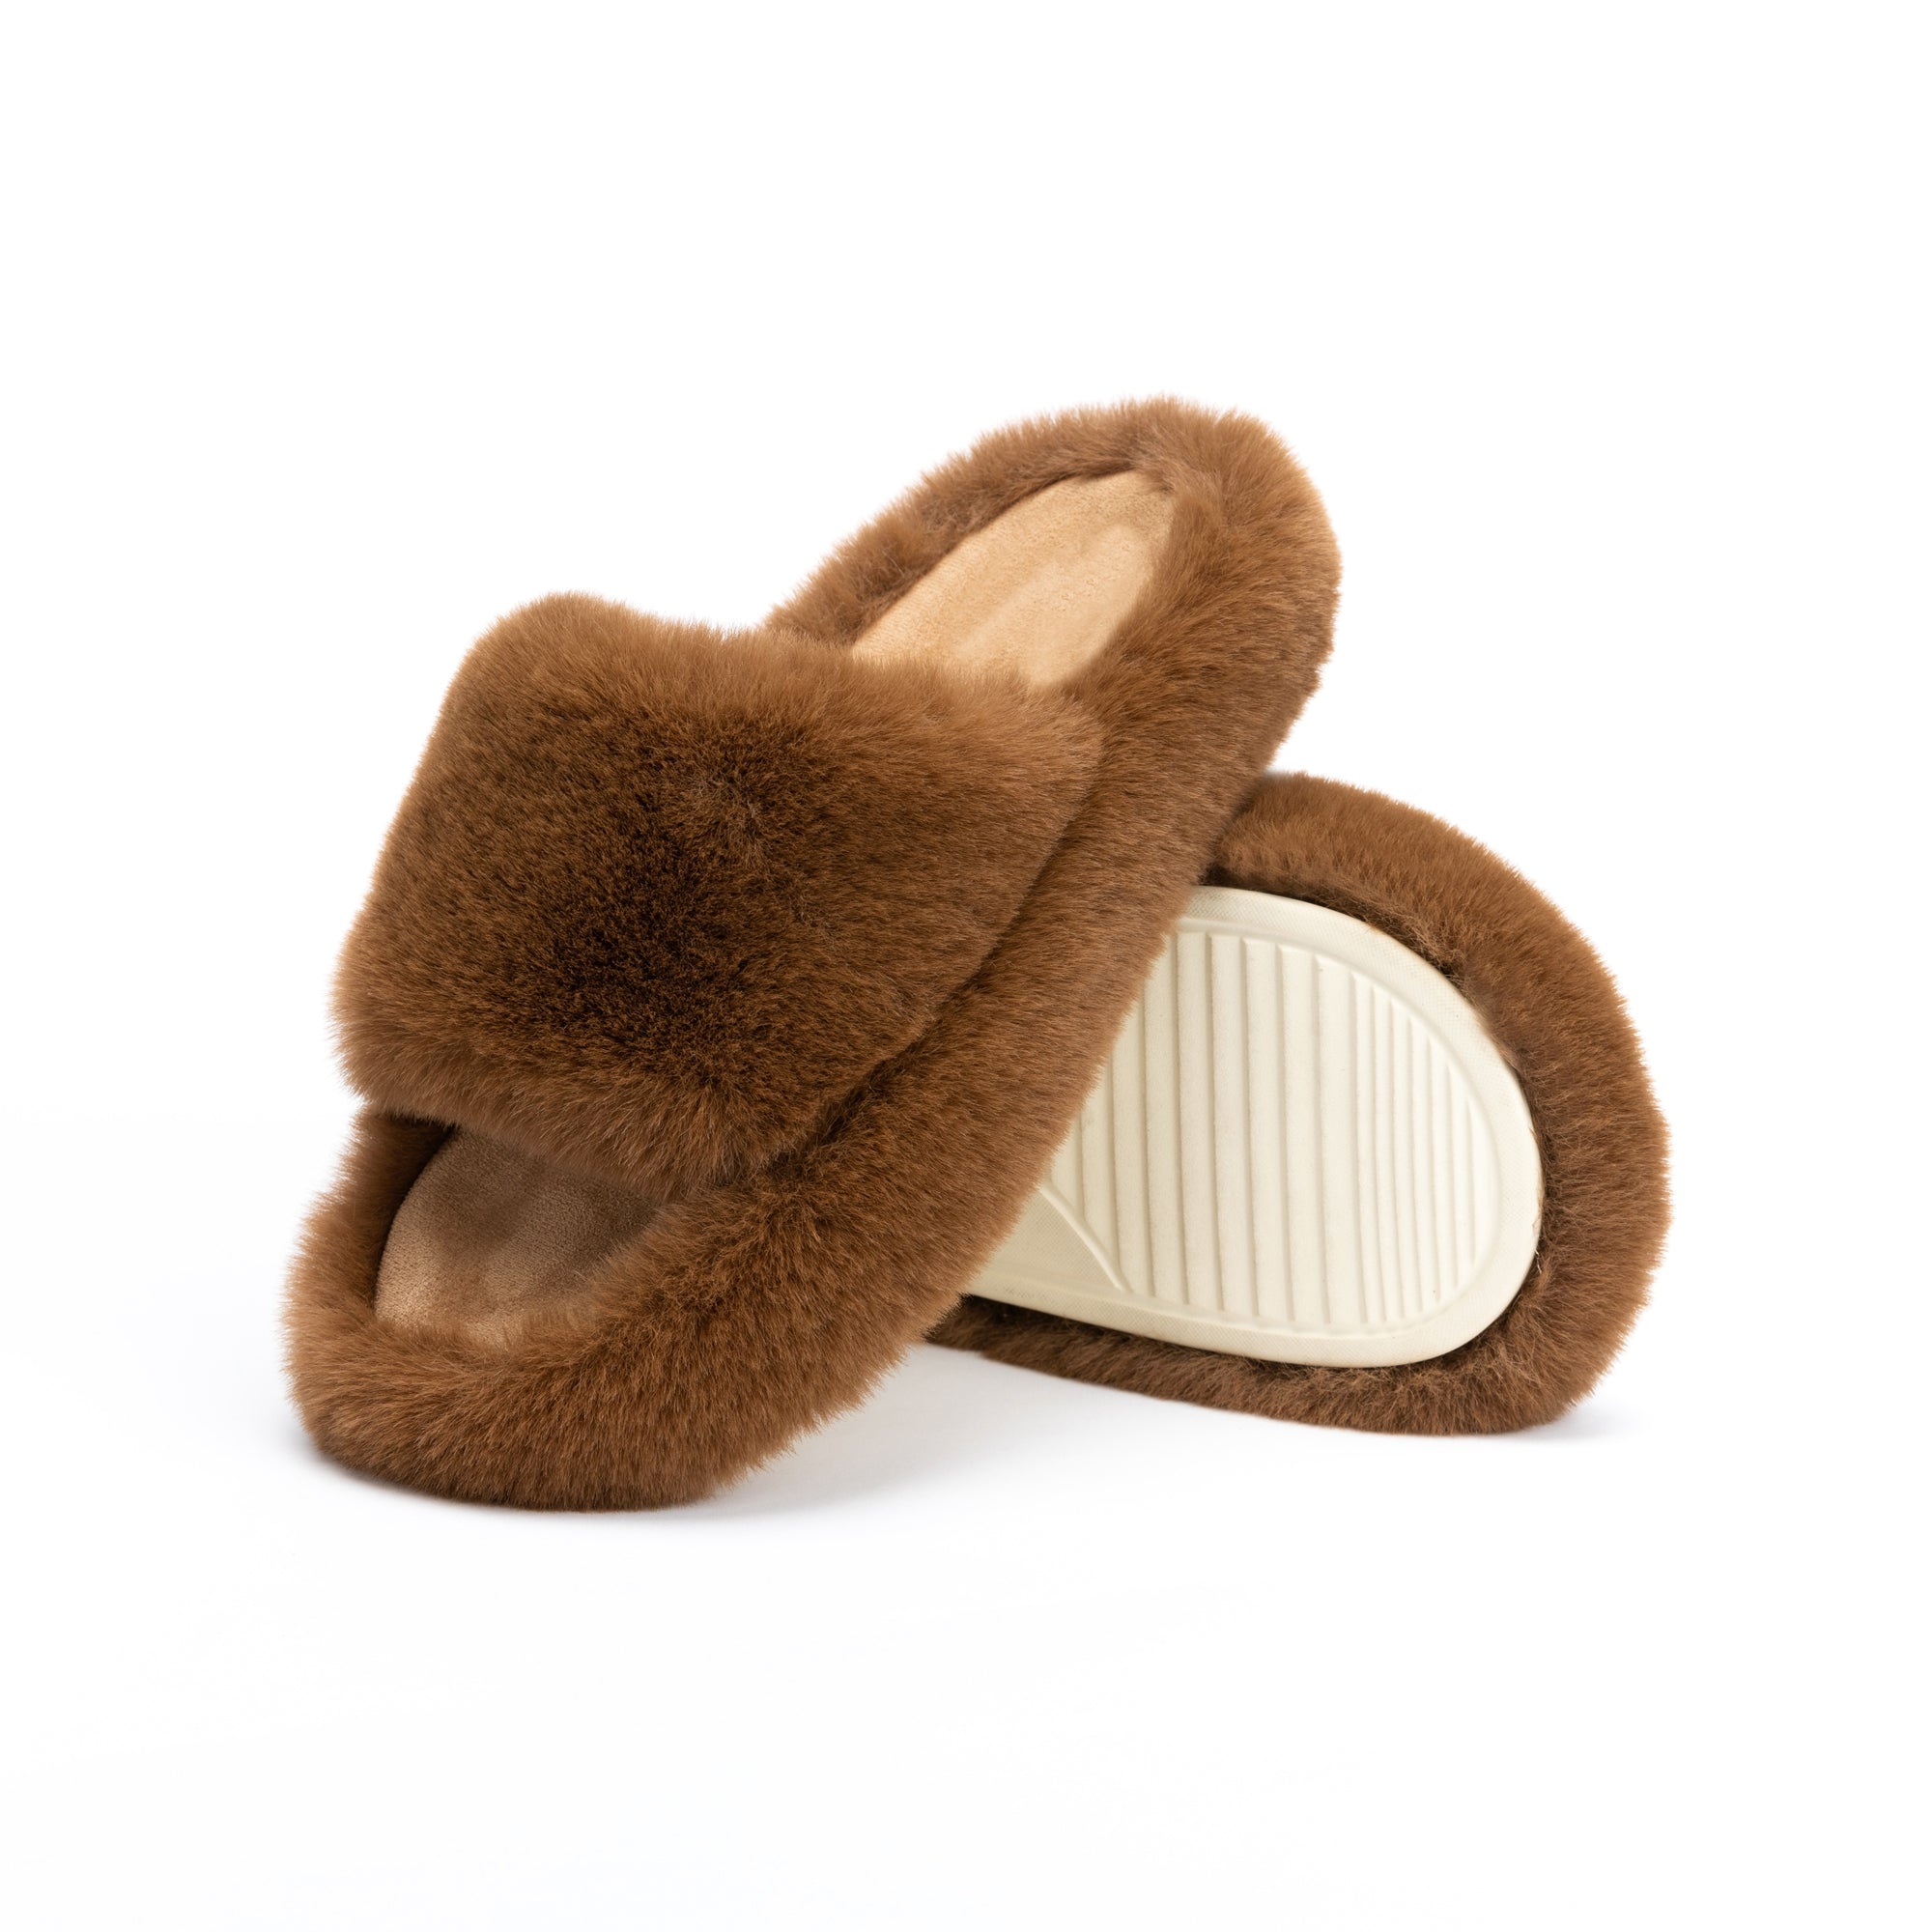 Quealent house slippers for women memory foam Fuzzy